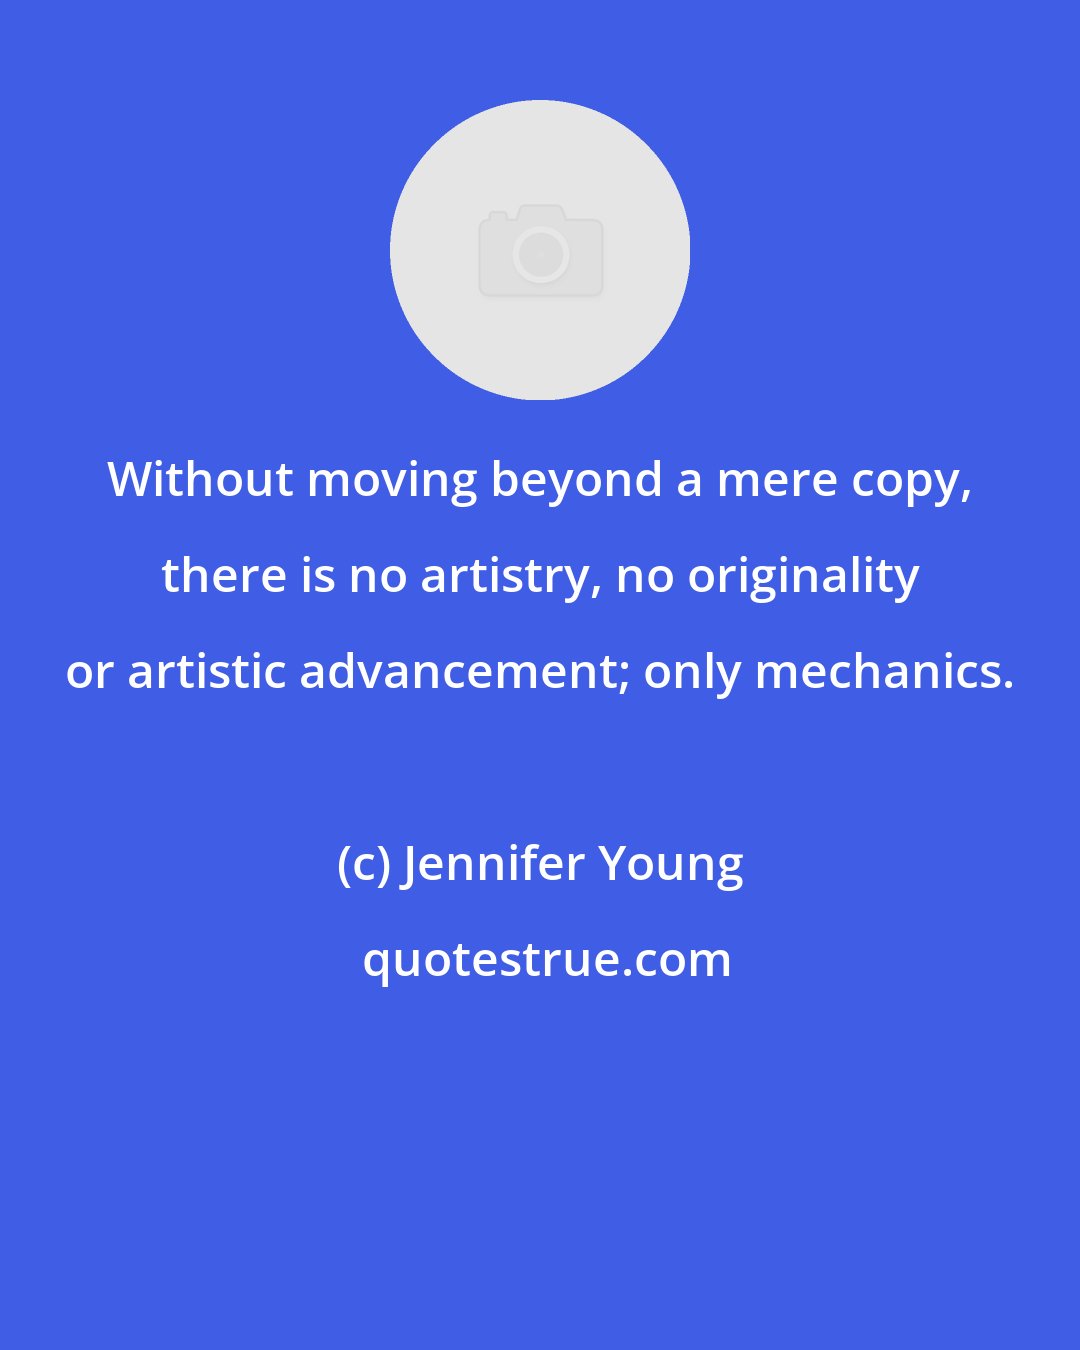 Jennifer Young: Without moving beyond a mere copy, there is no artistry, no originality or artistic advancement; only mechanics.